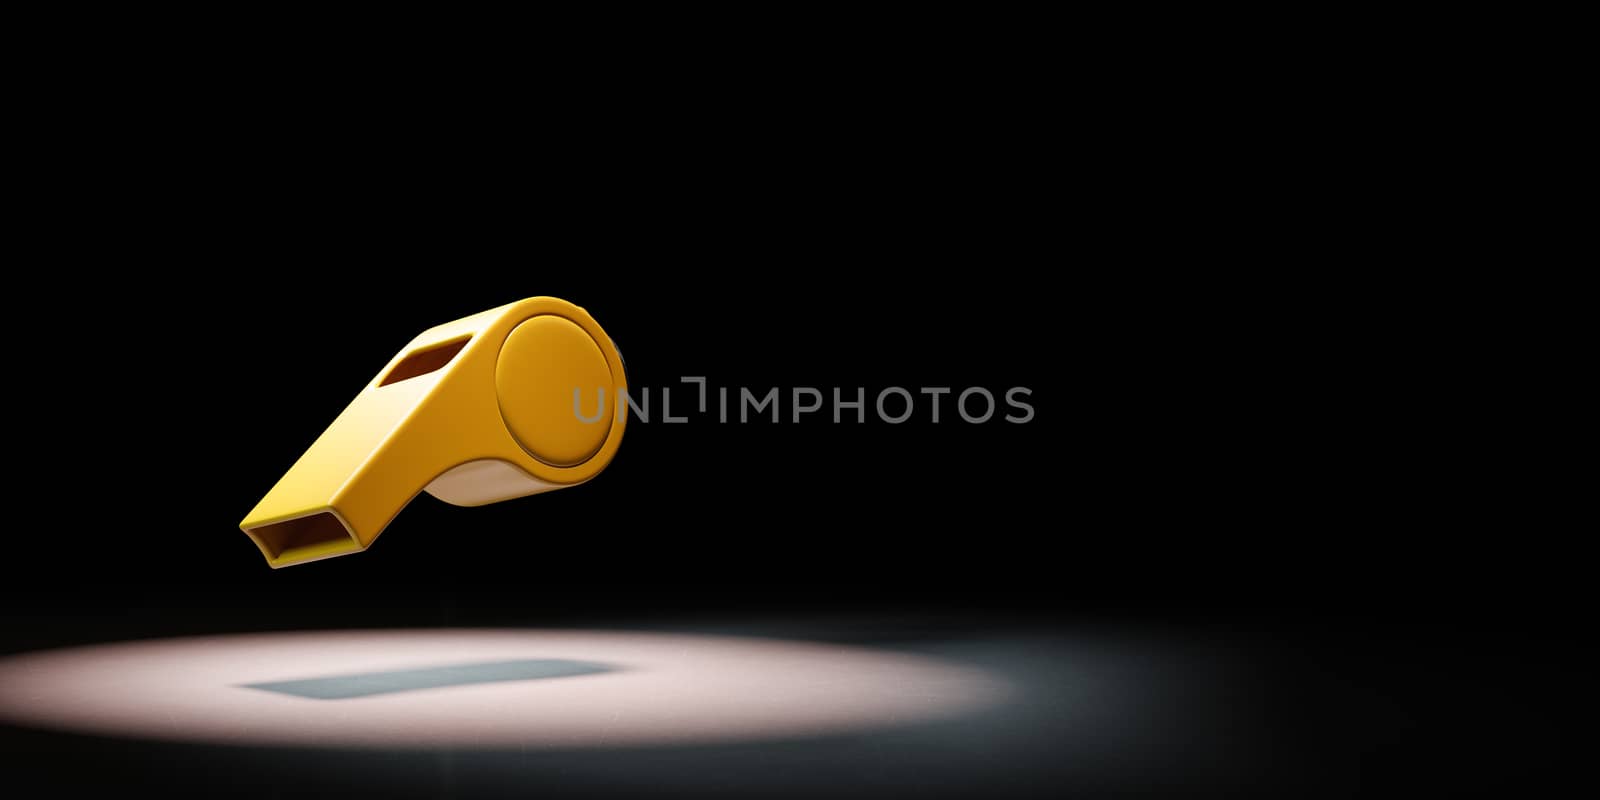 One Yellow Plastic Whistle Spotlighted on Black Background by make